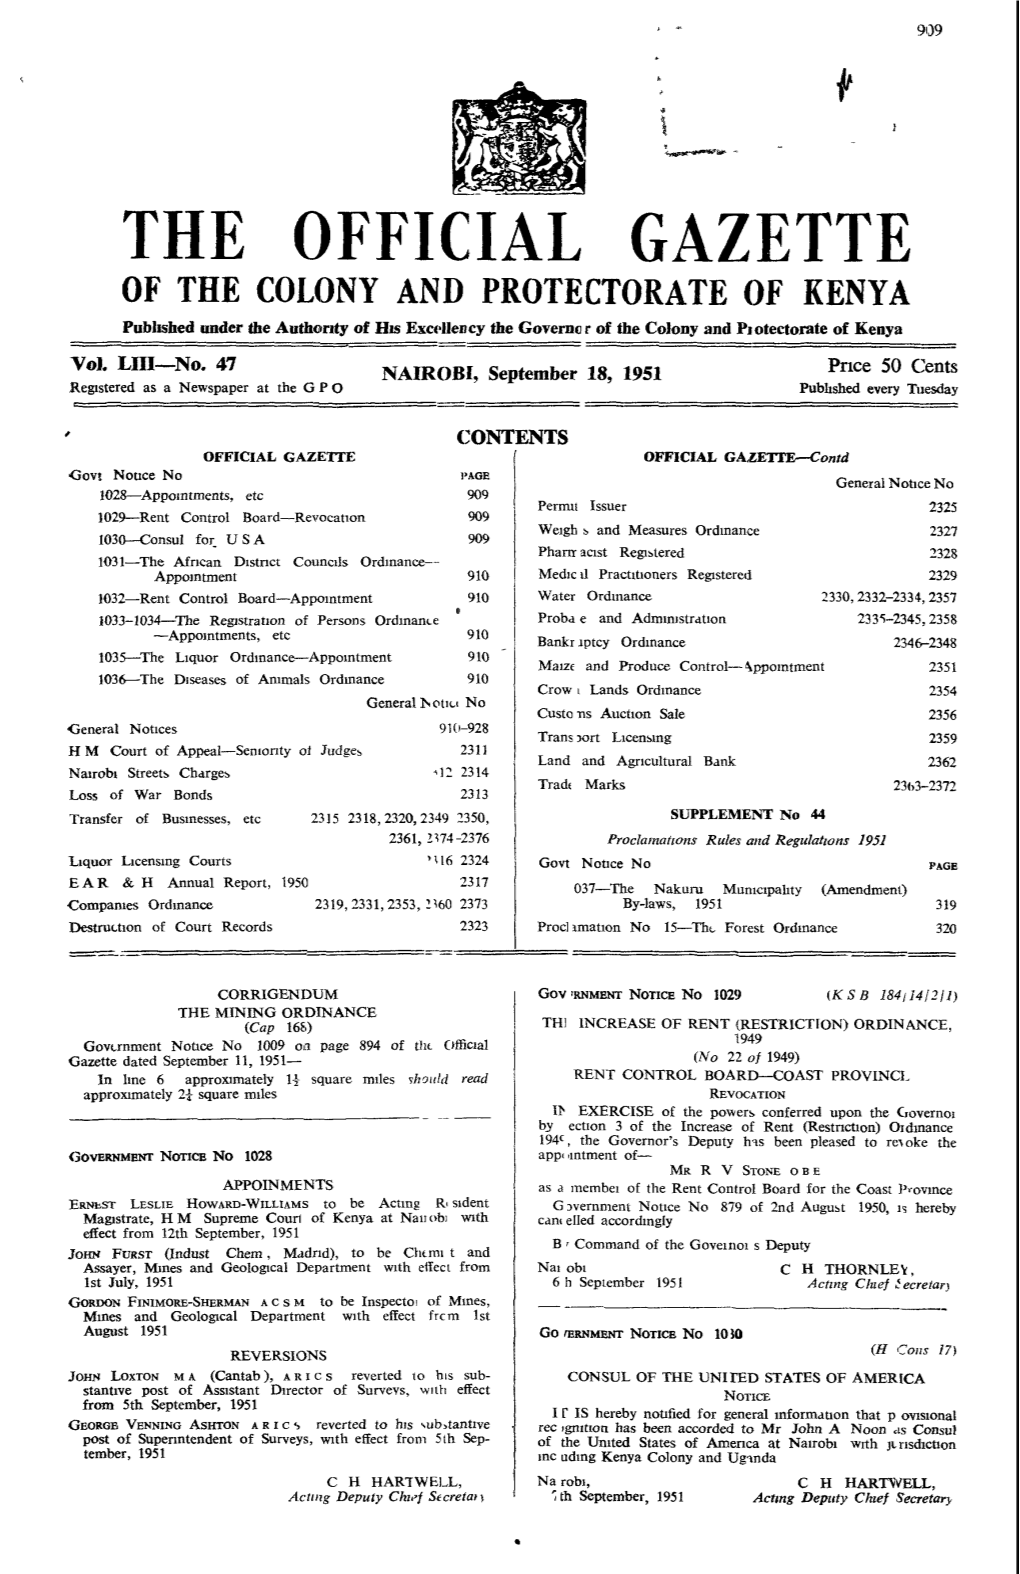 THE OFFICIAL GAZETTE of the COLONY and PROTECTORATE of KENYA Published Under the Author~Tyof Hisexct*Llency the Governa R of the Colony and P~Otectorateof Kenya - Val